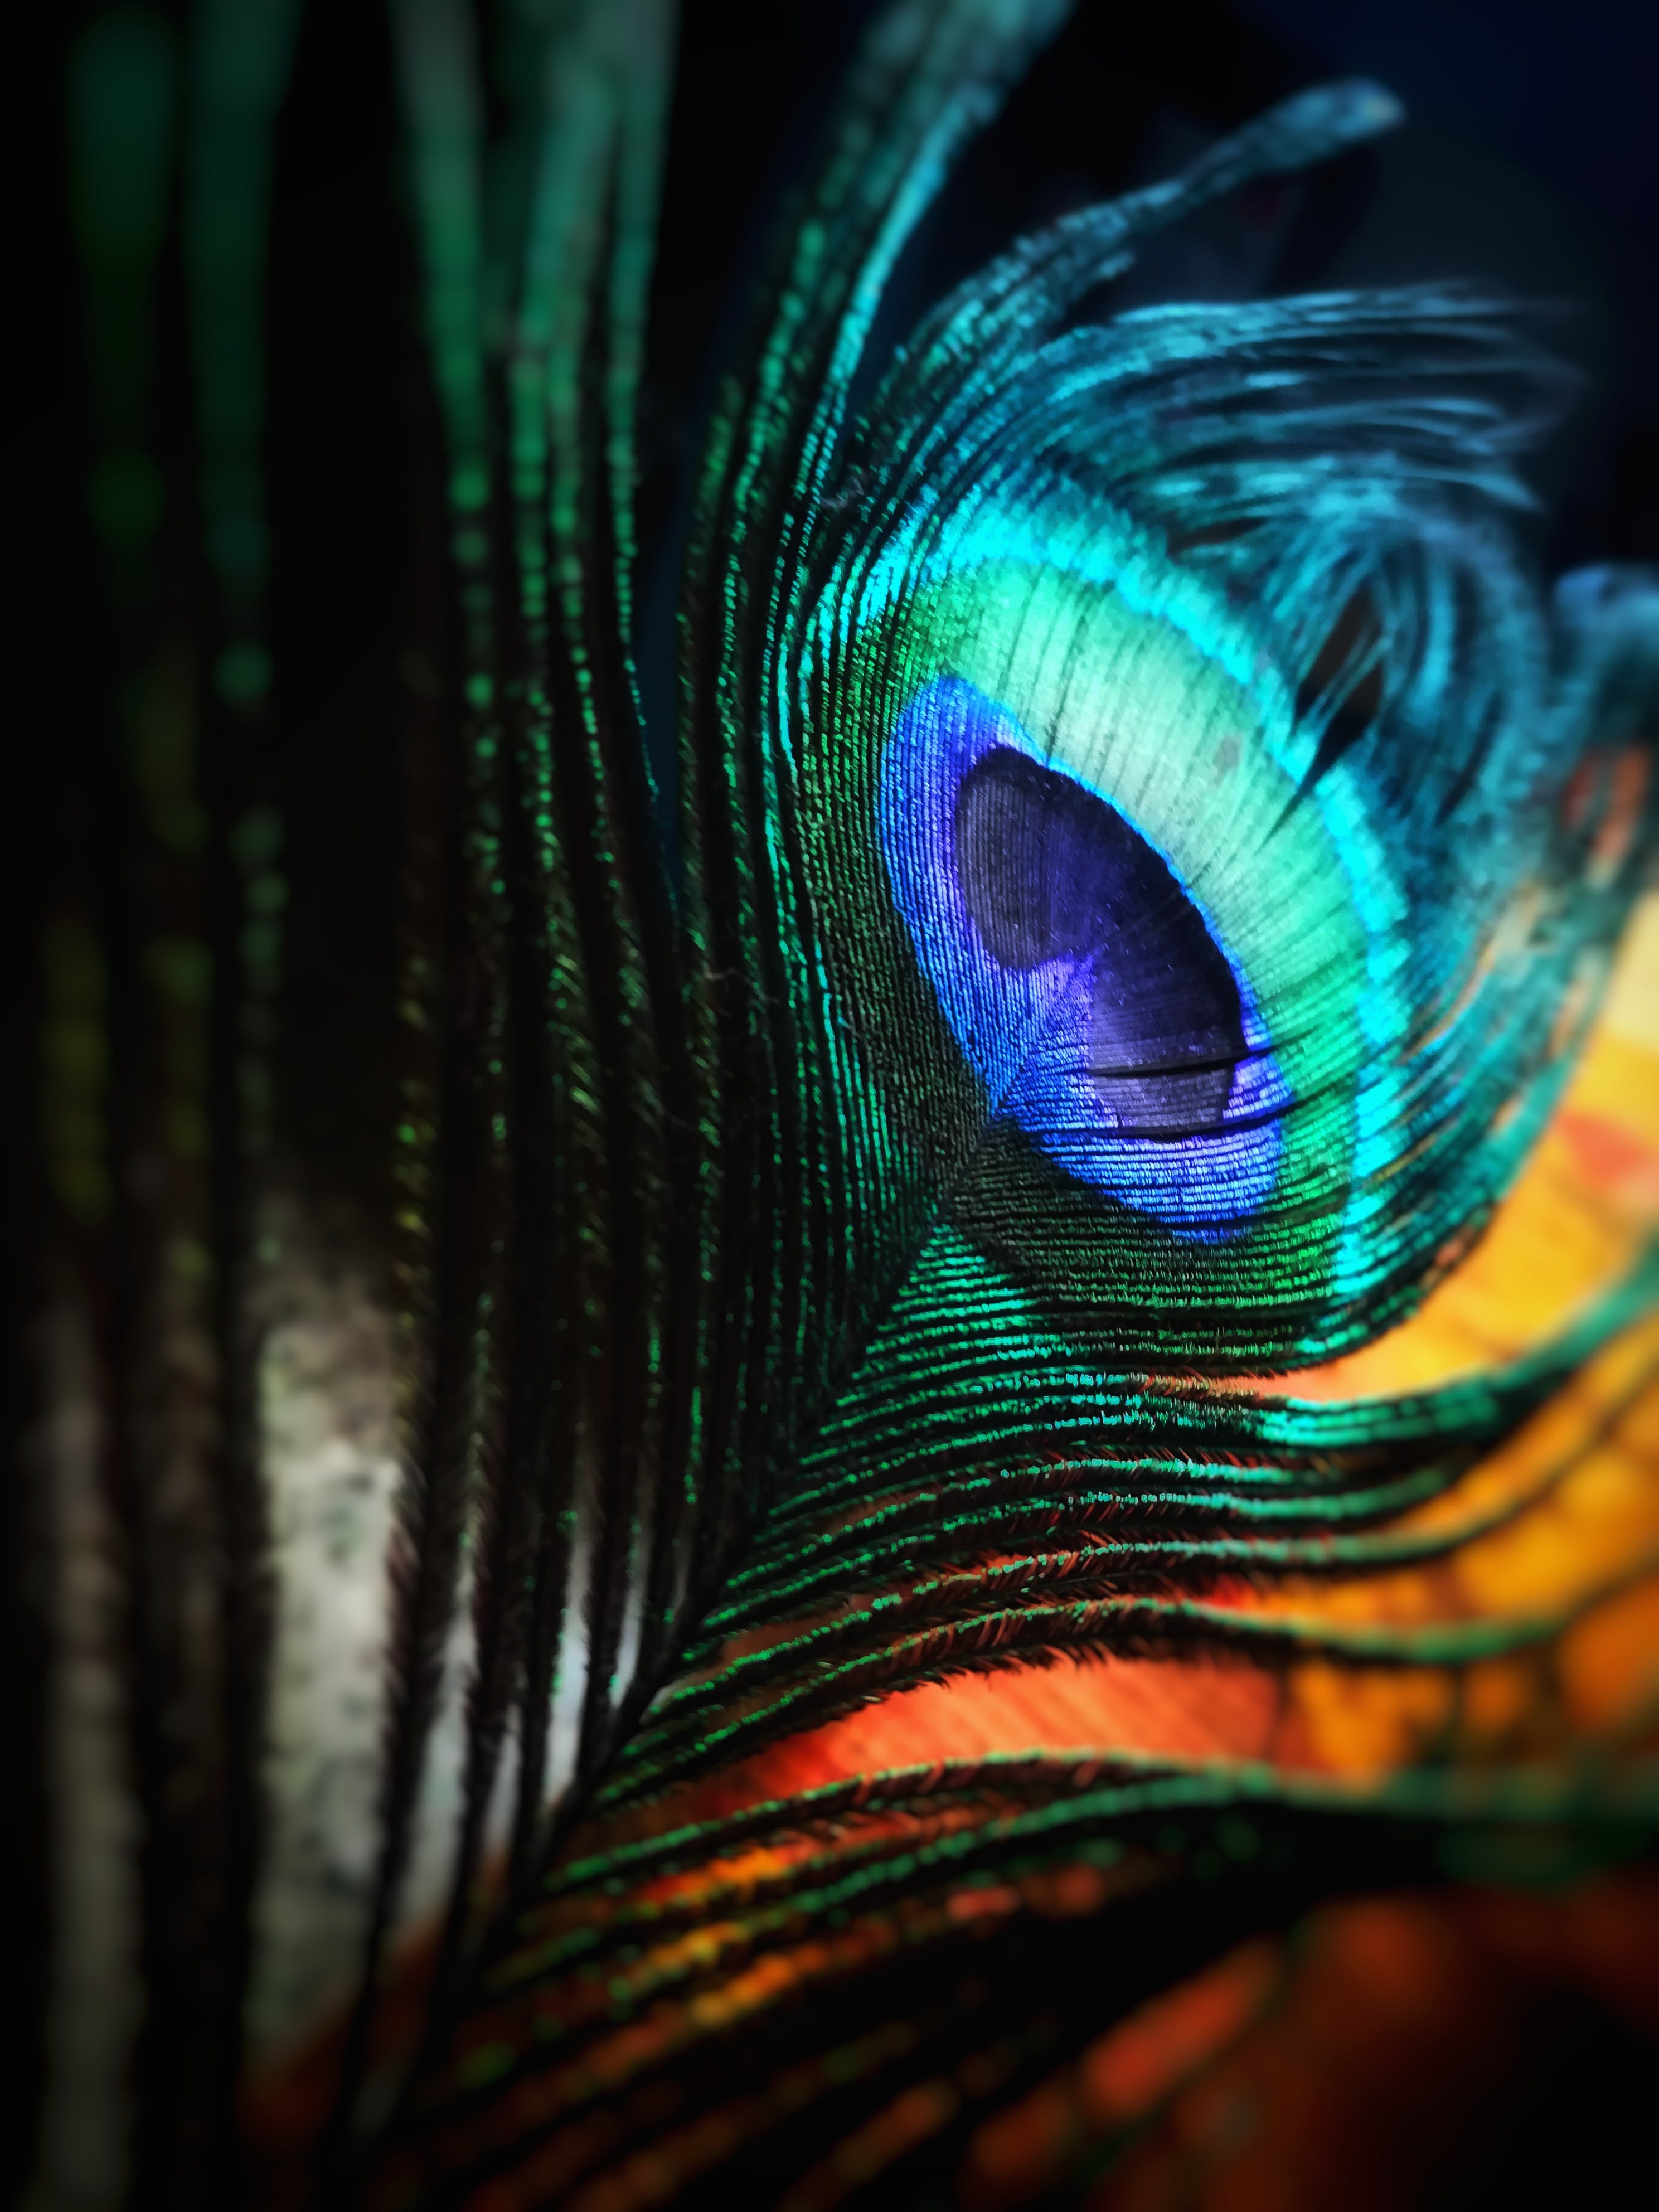 Peacock Feather & HD Image